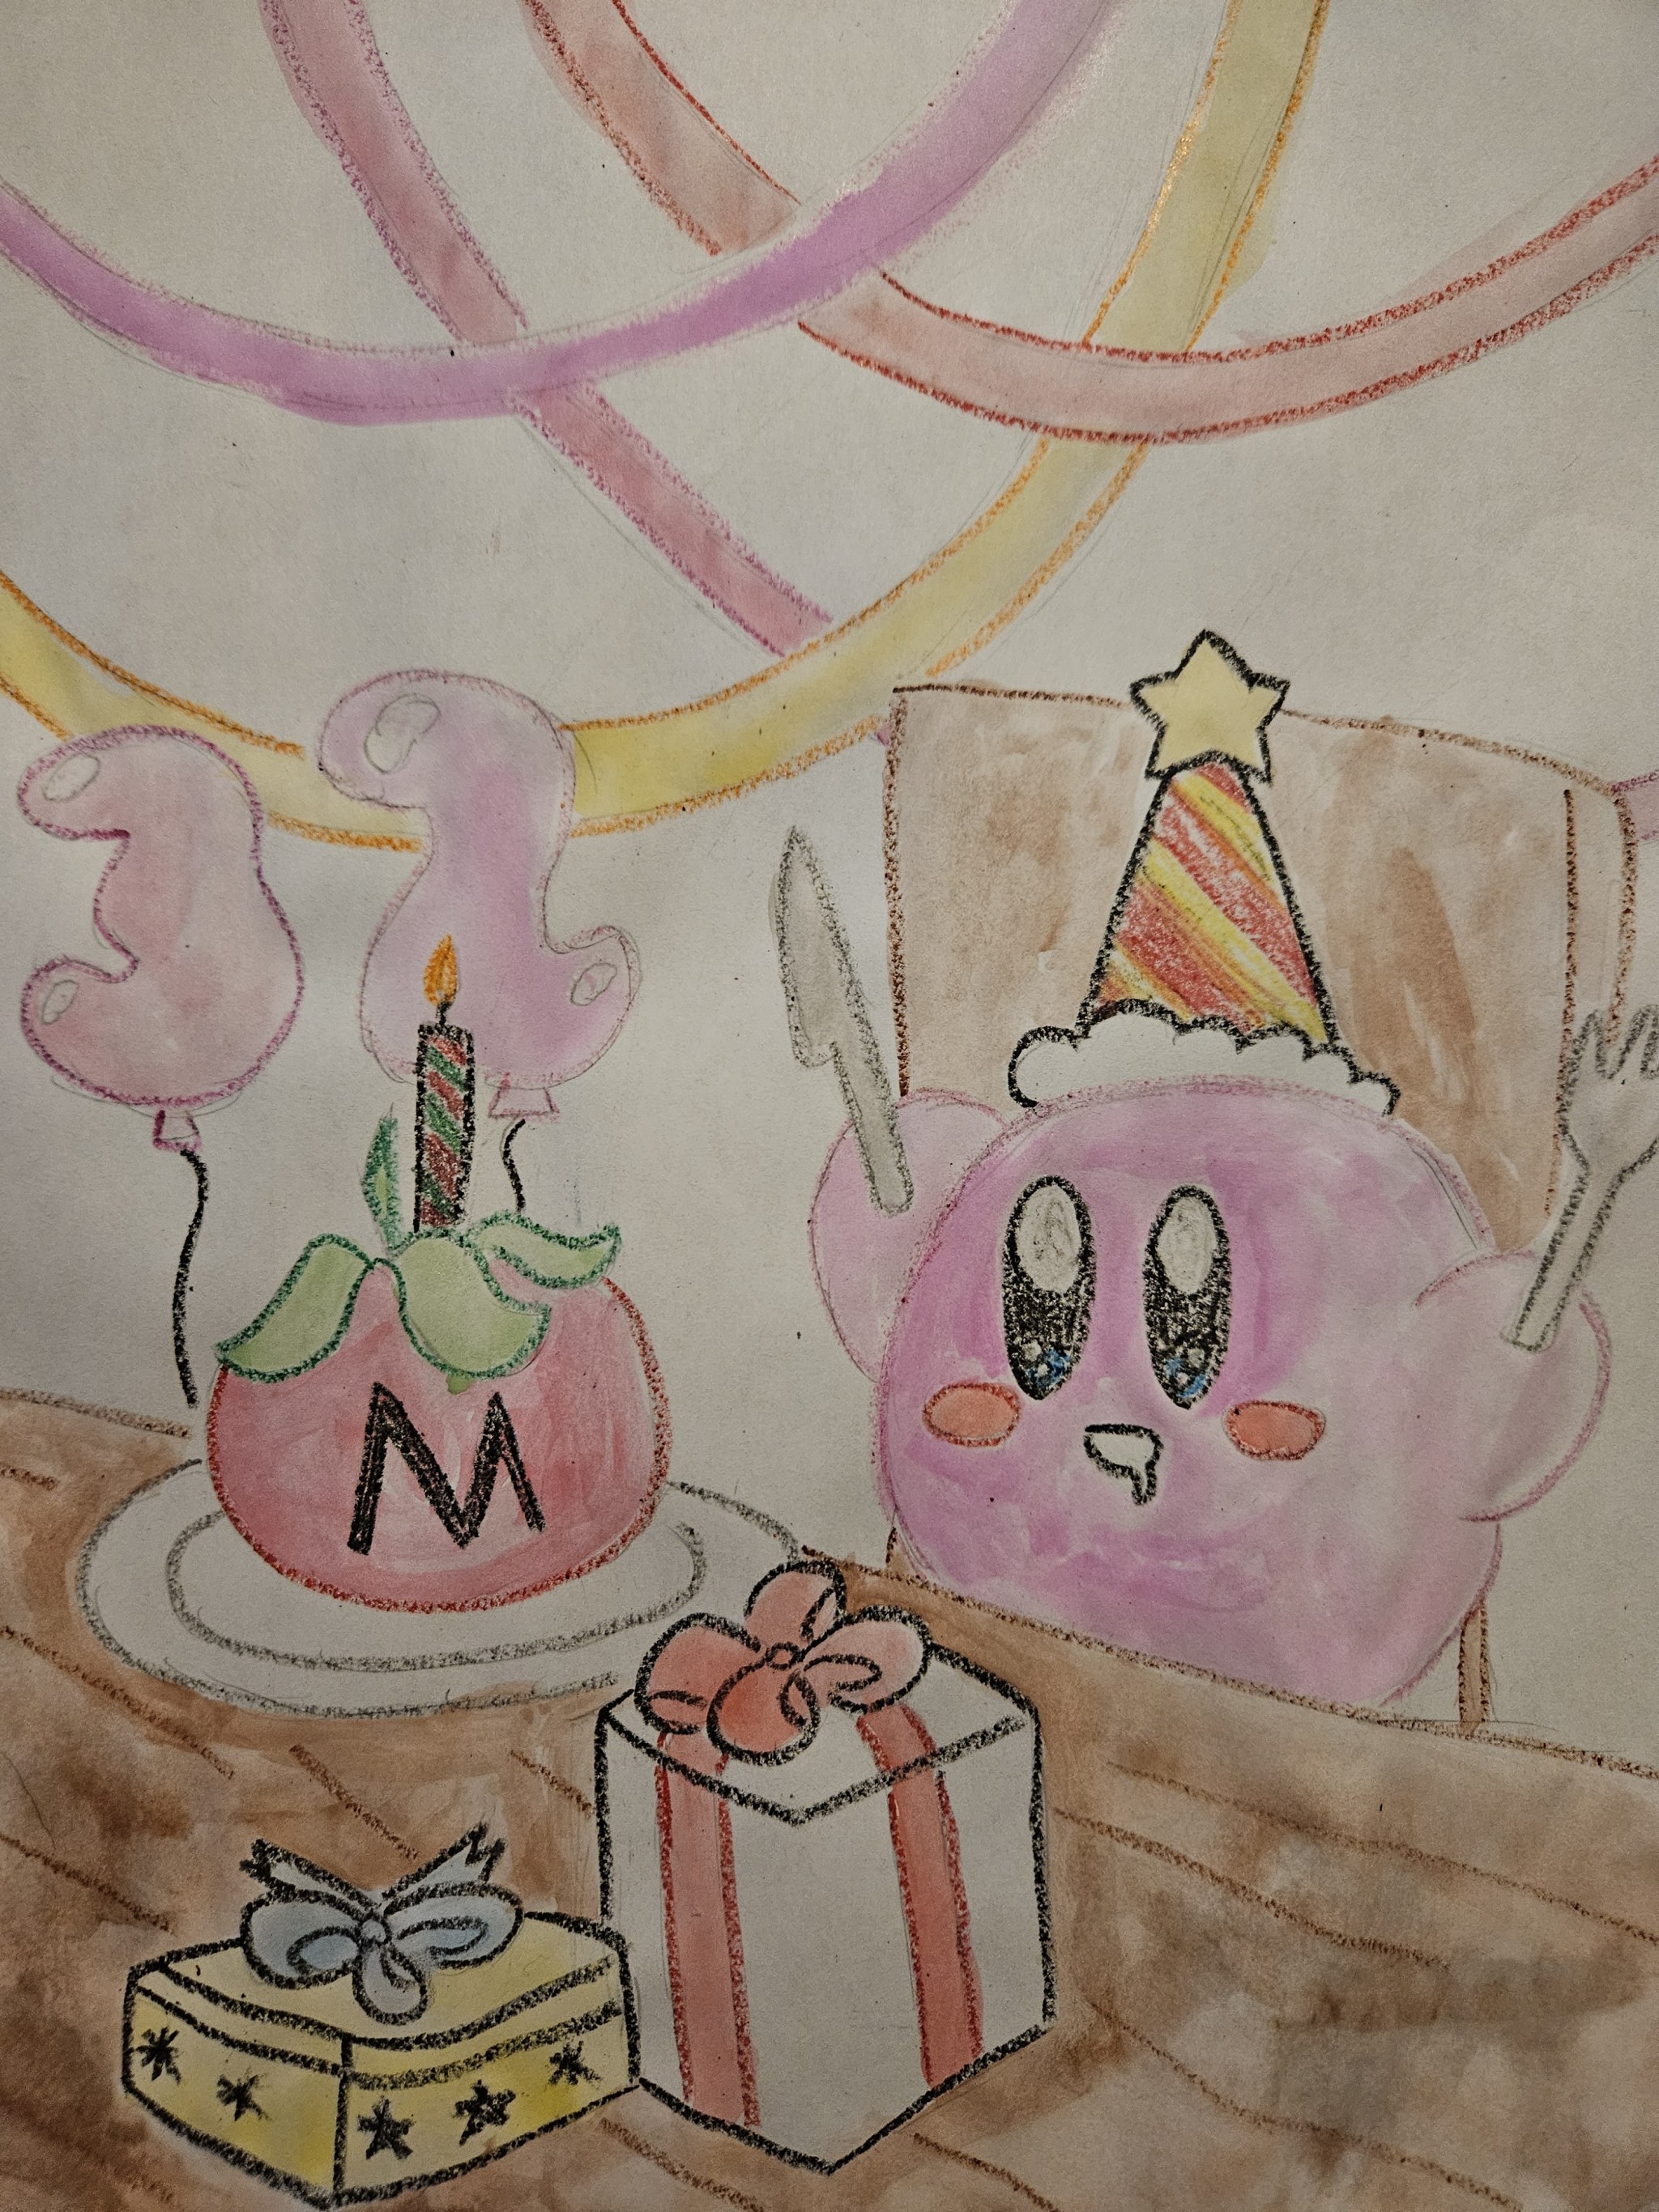 a watercolor painting of Kirby's birthday party. he's wearing a party hat and sitting at a table, holding a fork and knife and staring excitedly at a maxim tomato in place of a birthday cake. beside the tomato, there are two wrapped presents on the table. the background is decorated with pink and yellow streamers, and two pink balloons shaped like the numbers 3 and 2.